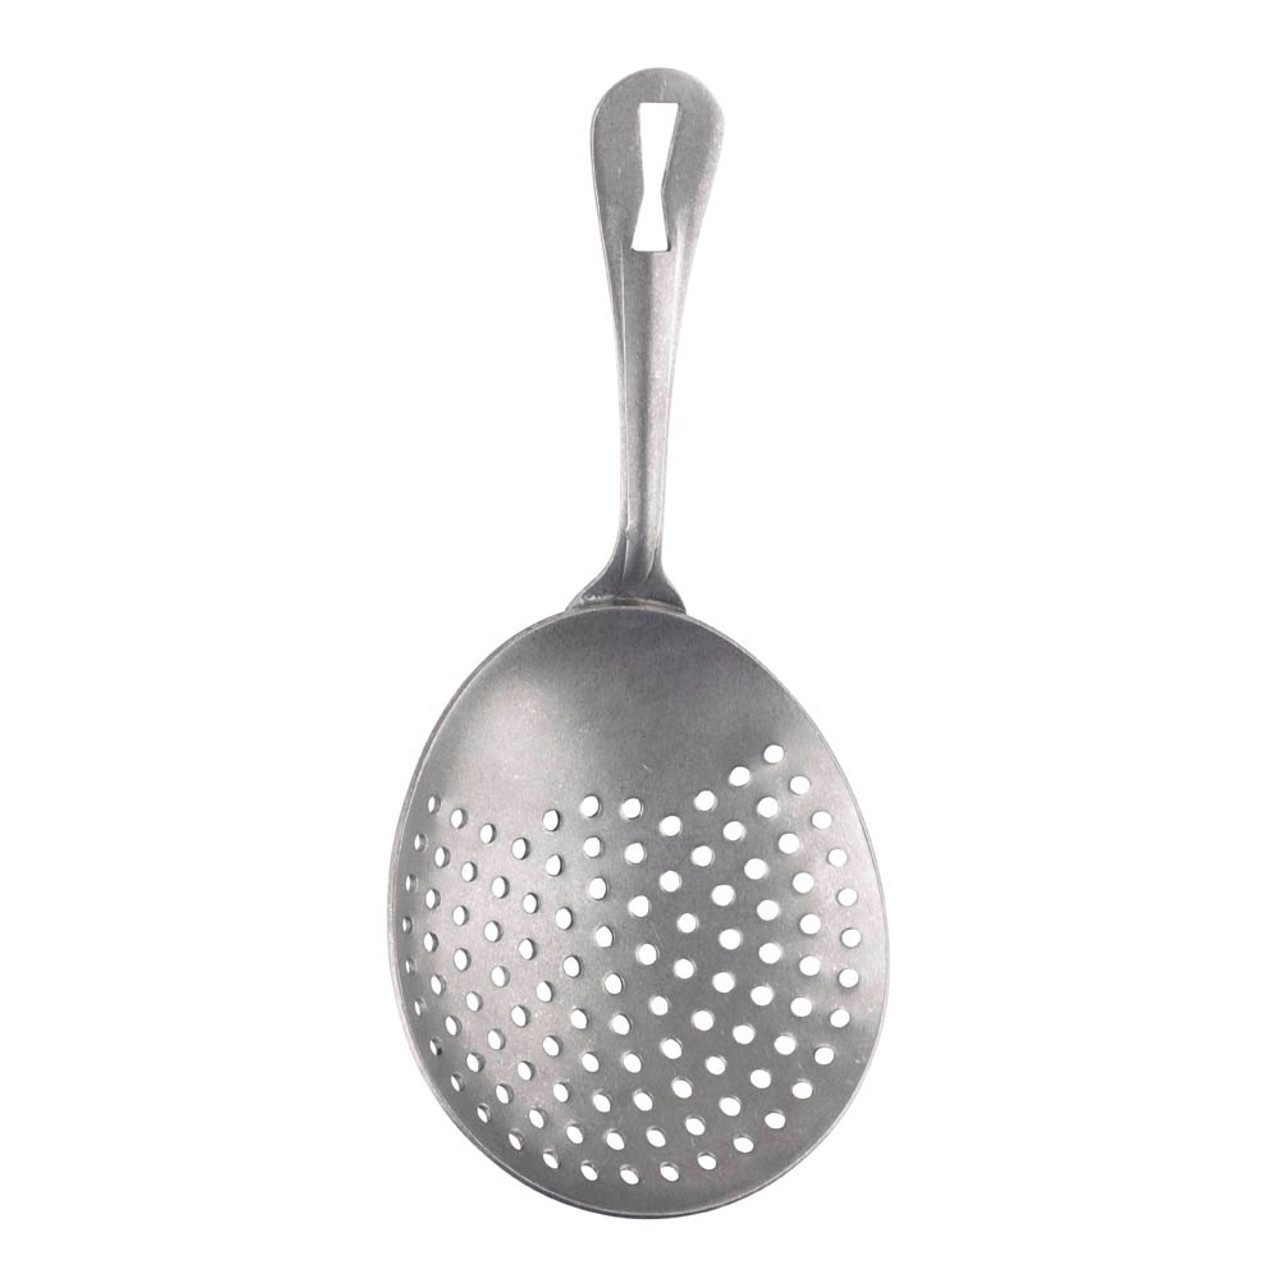 https://cdn11.bigcommerce.com/s-cznxq08r7/images/stencil/1280x1280/products/1682/7605/m37028vn-barfly-julep-strainer-vintage-stainless-steel-finish-2__75230.1590771326.jpg?c=1